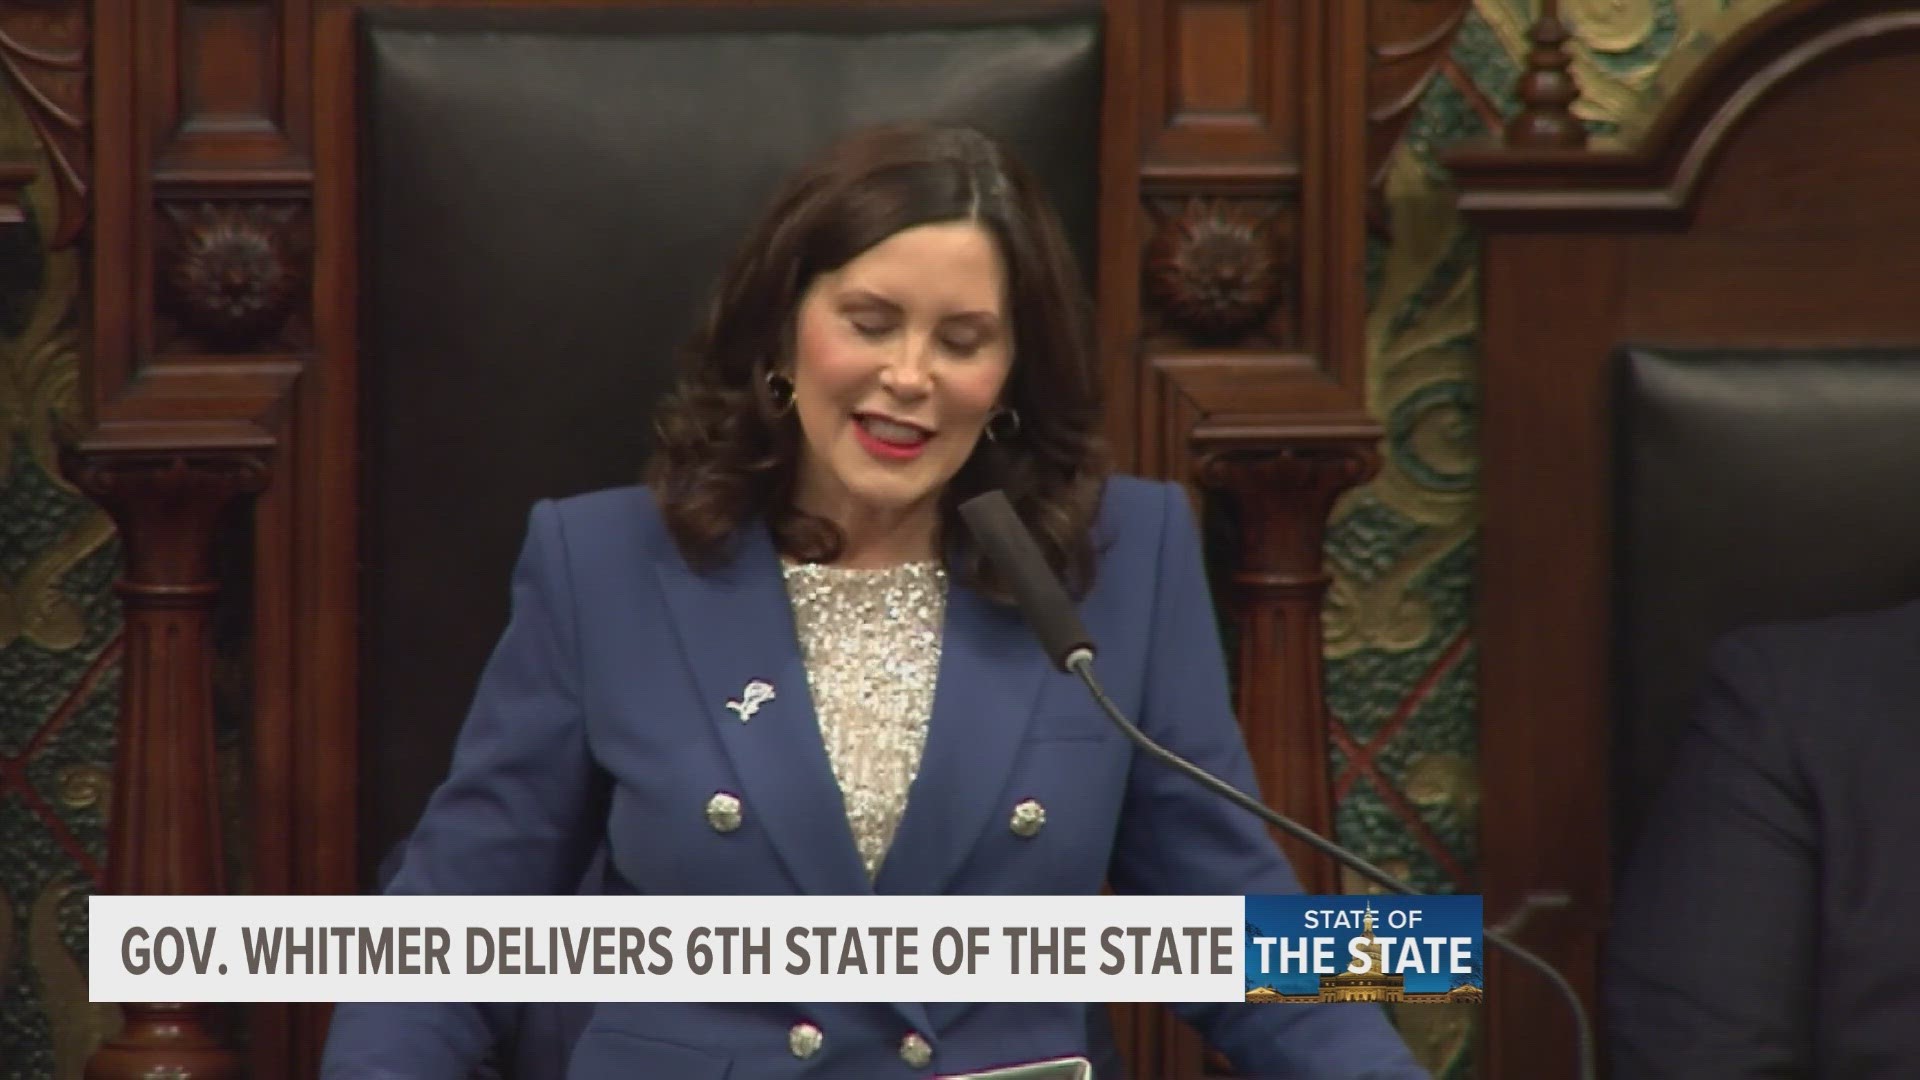 Whitmer pushed for a number of new proposals, including free community college for all qualified high school graduates and a tax credit for family caretakers.